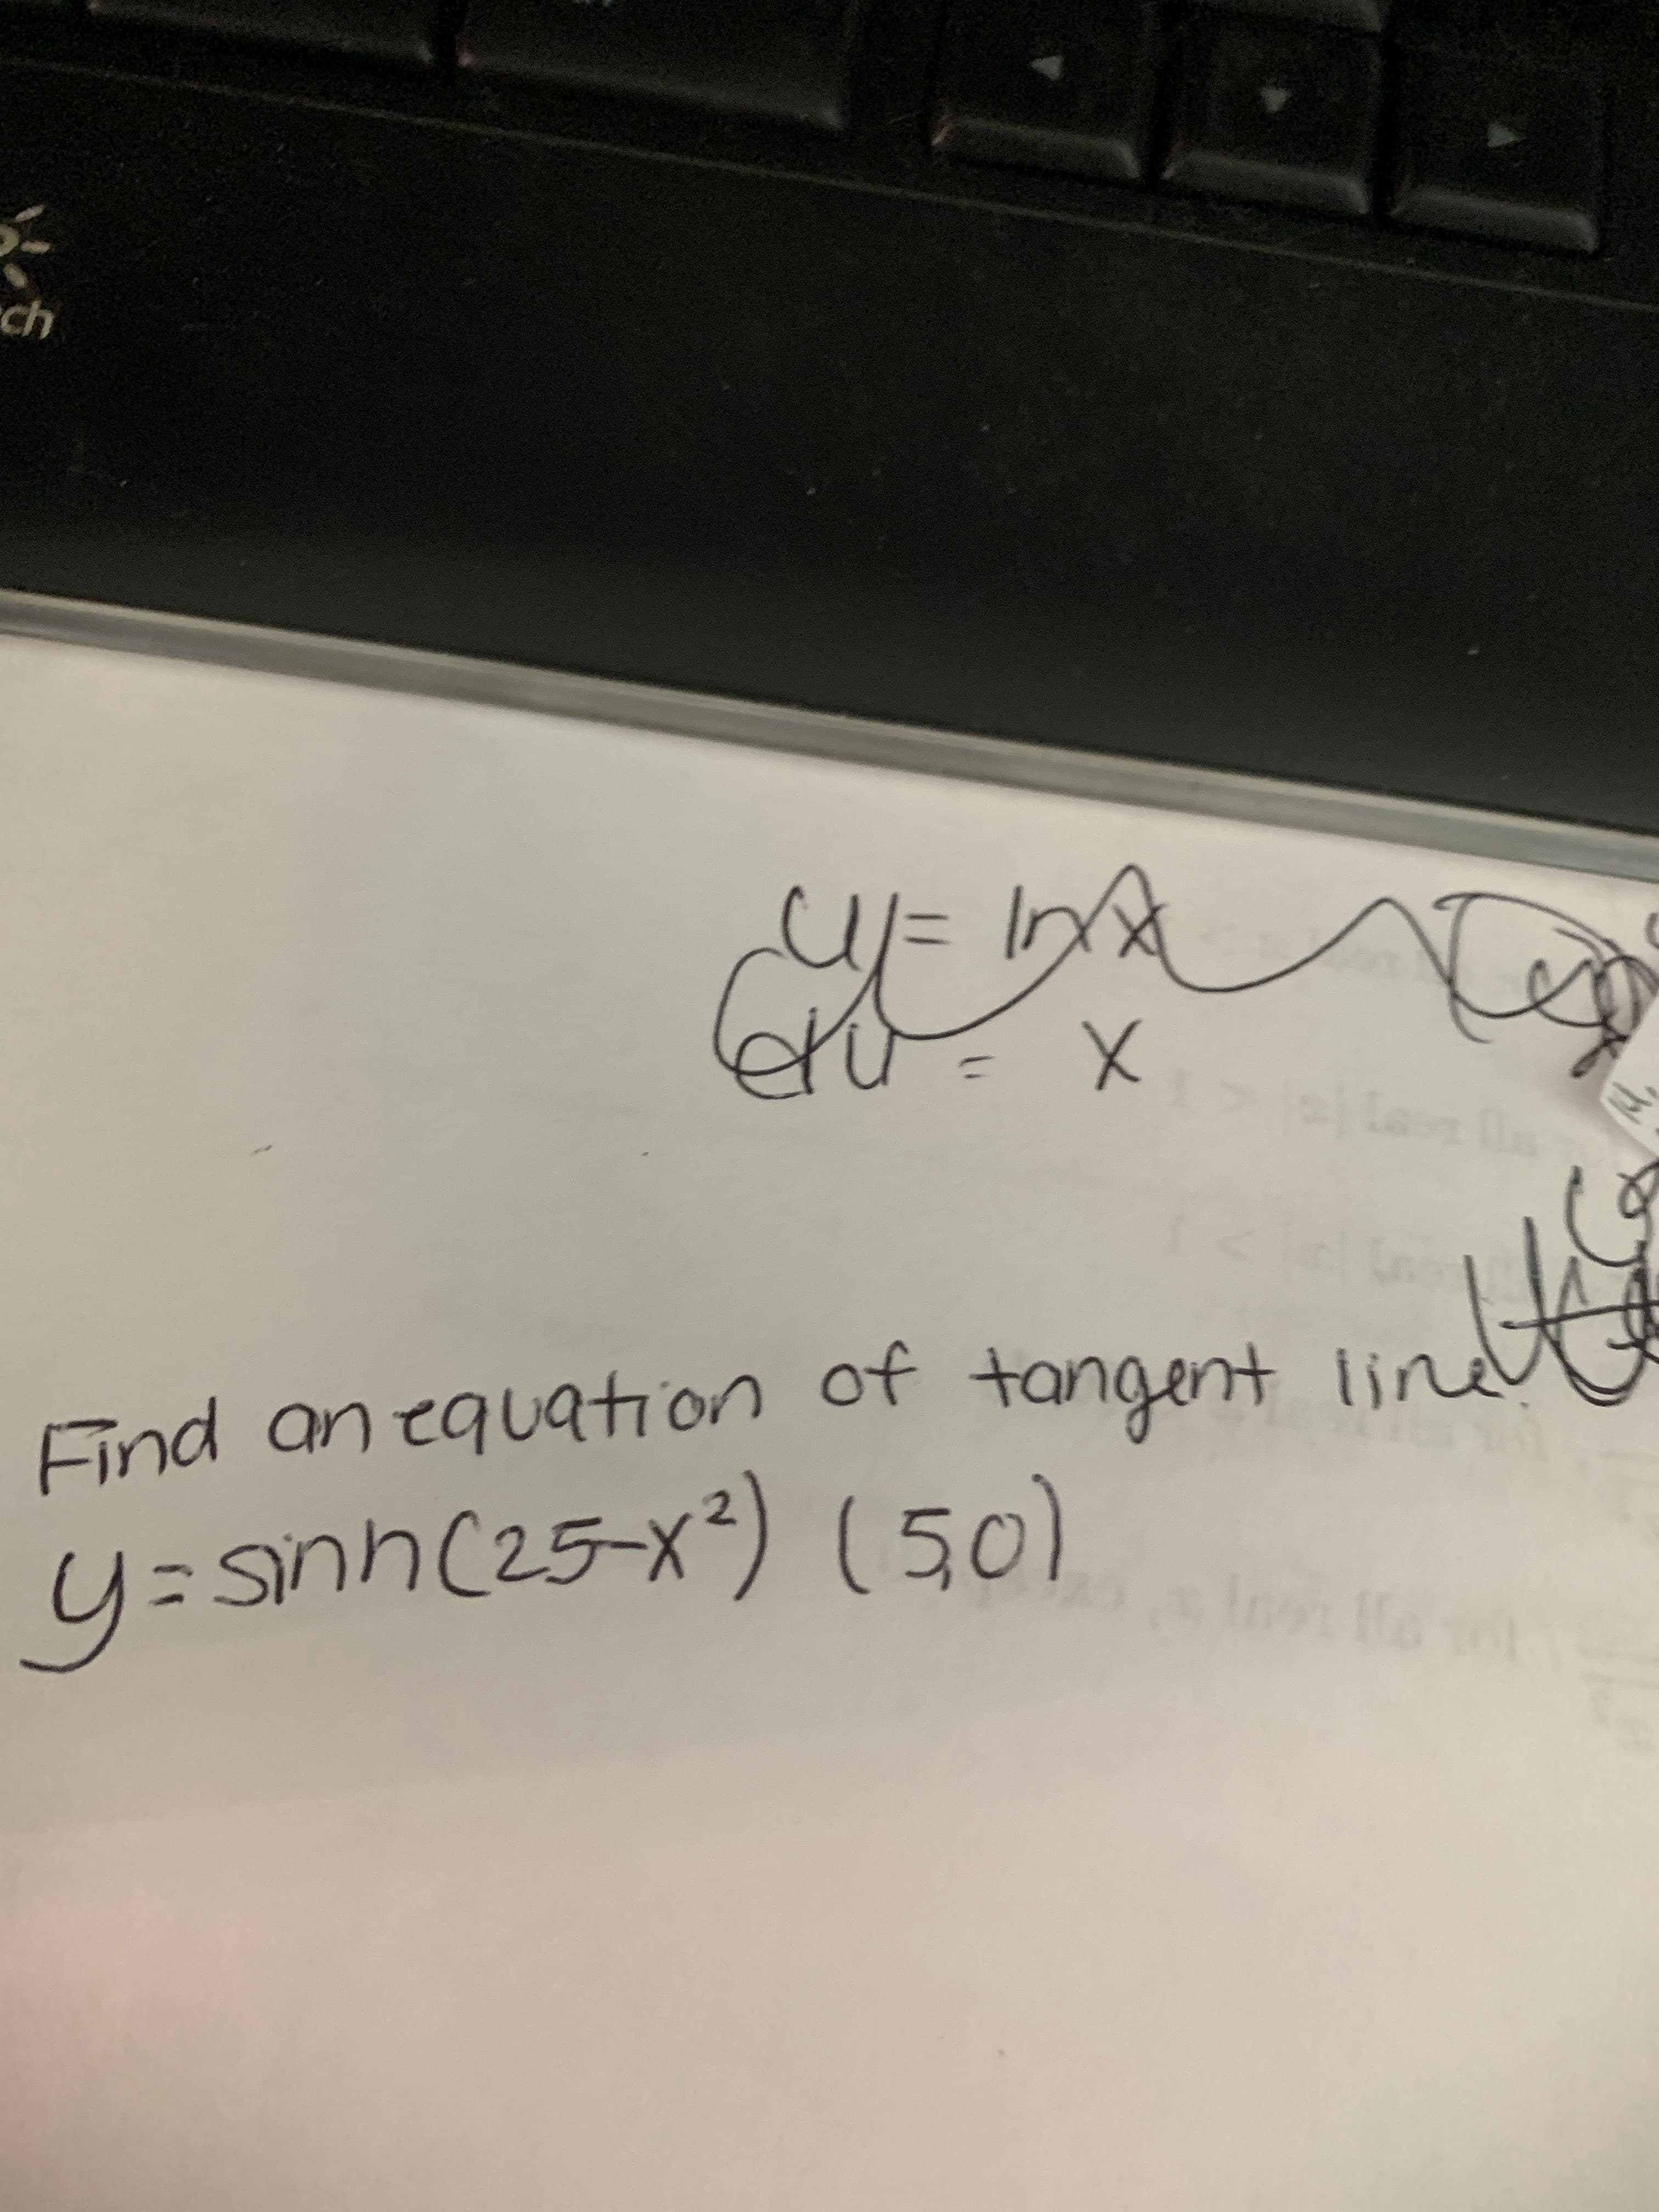 ind an equation of tar
y=snnc25-x²) (50)
ngent lir
